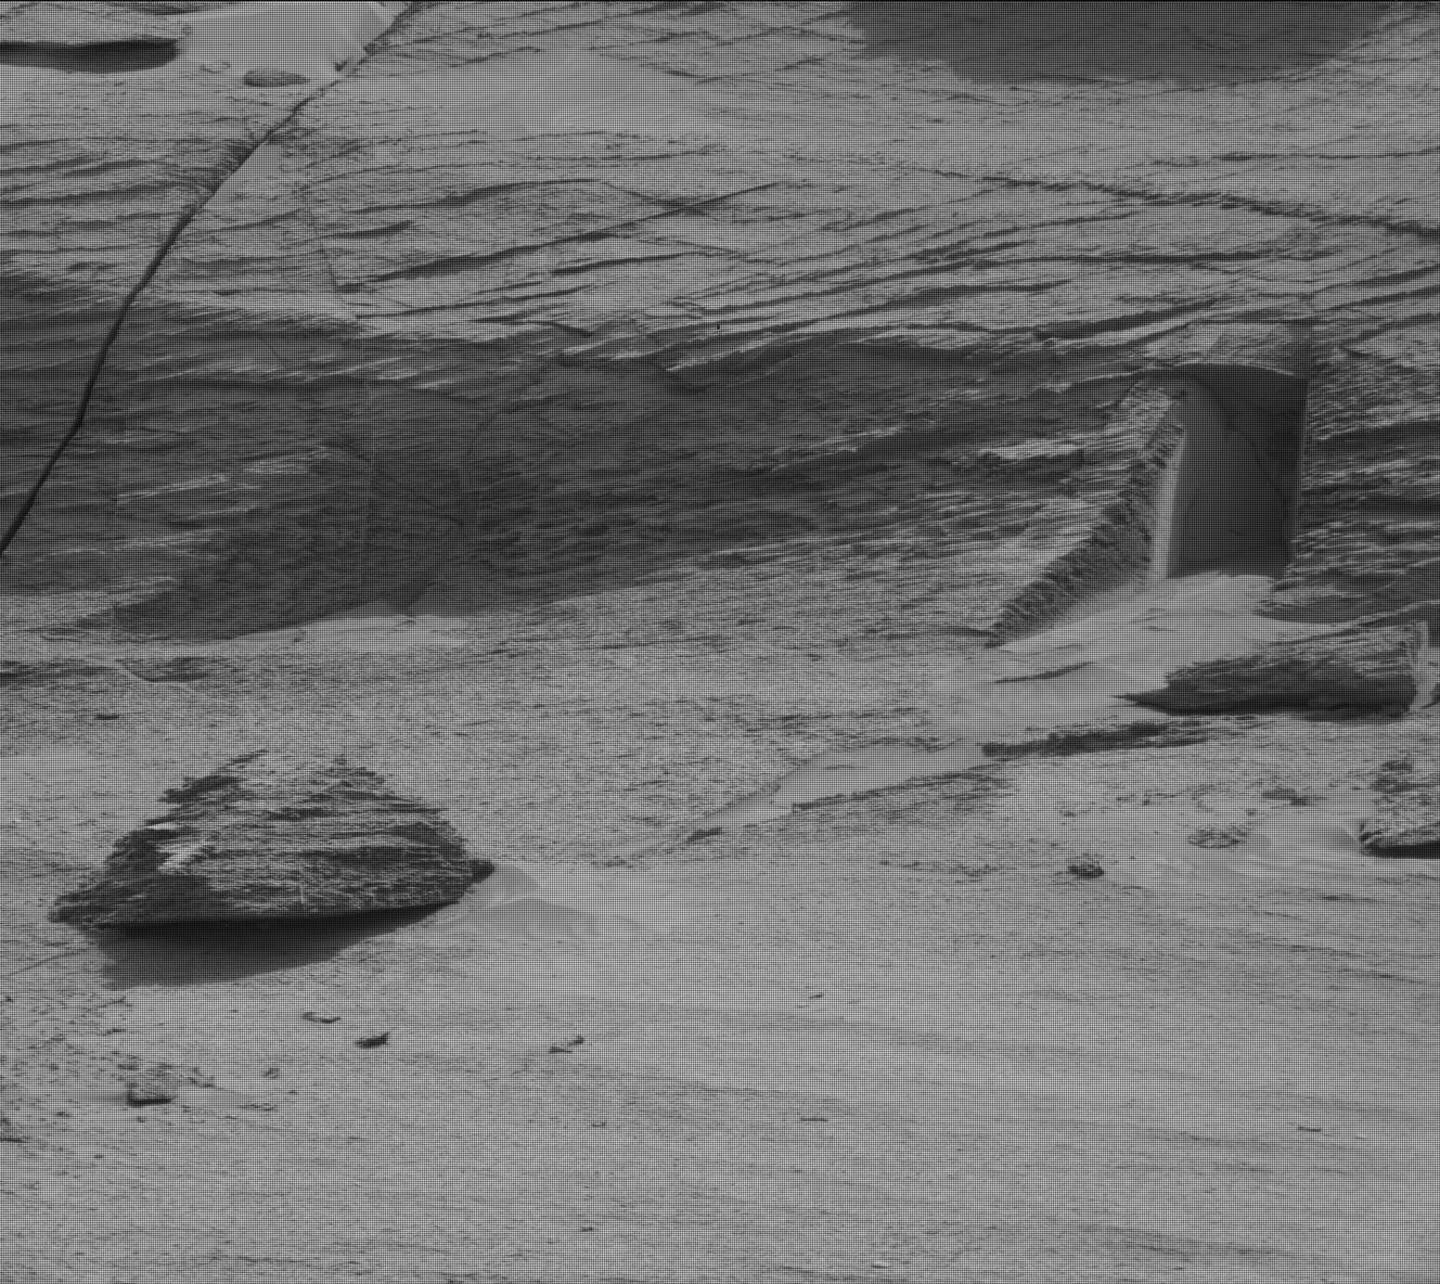 Last month, social media was abuzz with news that a Nasa rover had found an 'alien door' on Mars. Photo: Nasa / Curiosity rover